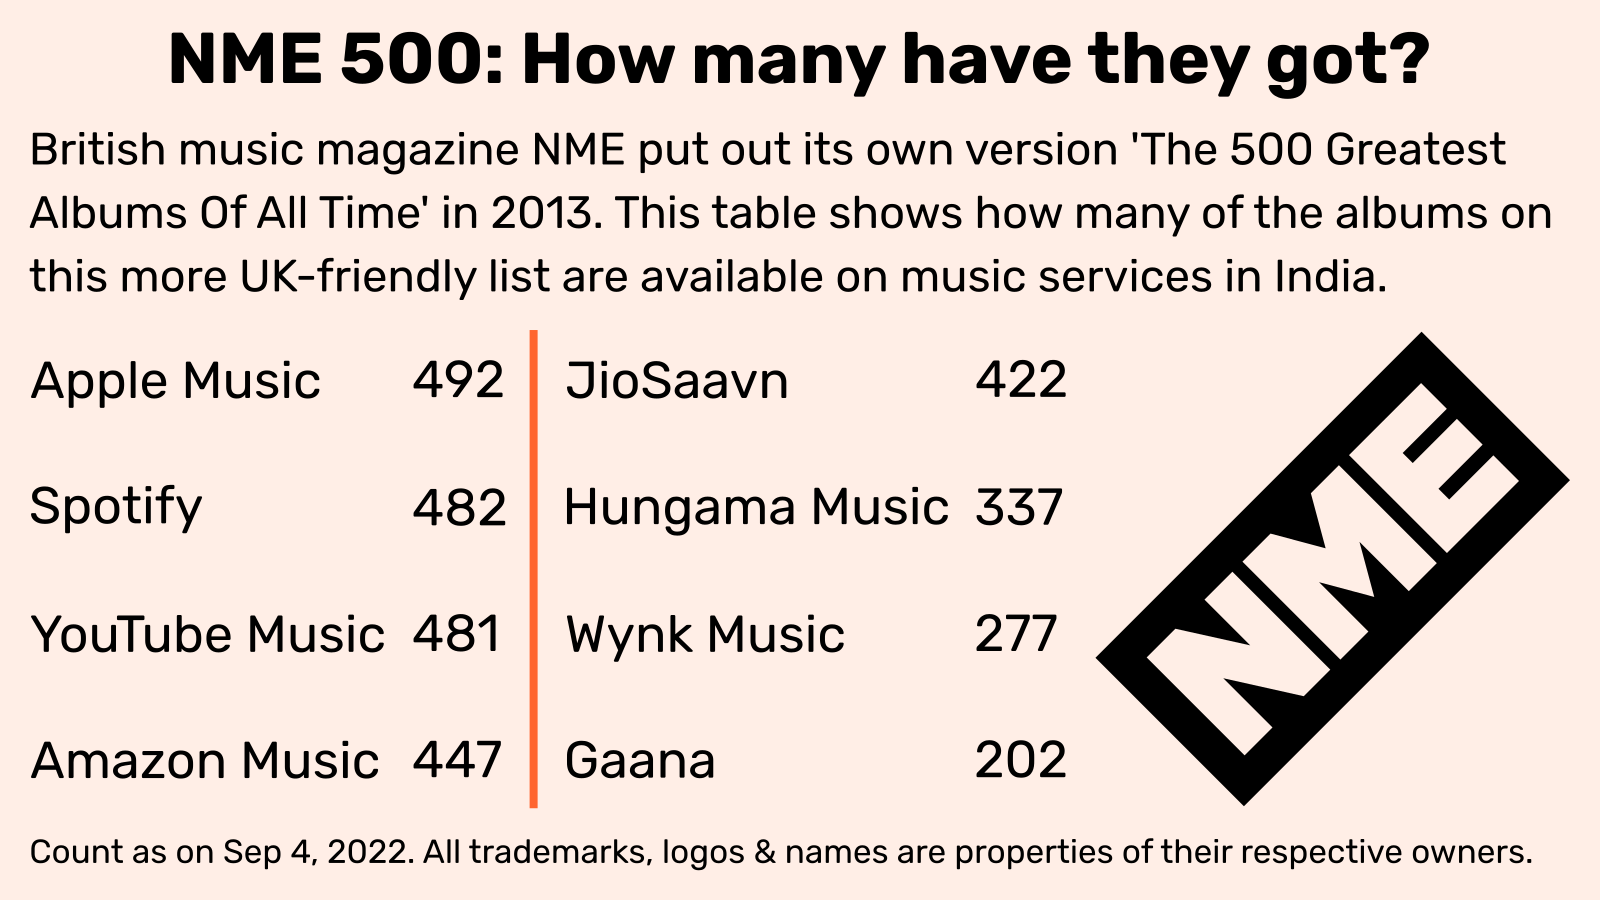 NME 500 Count